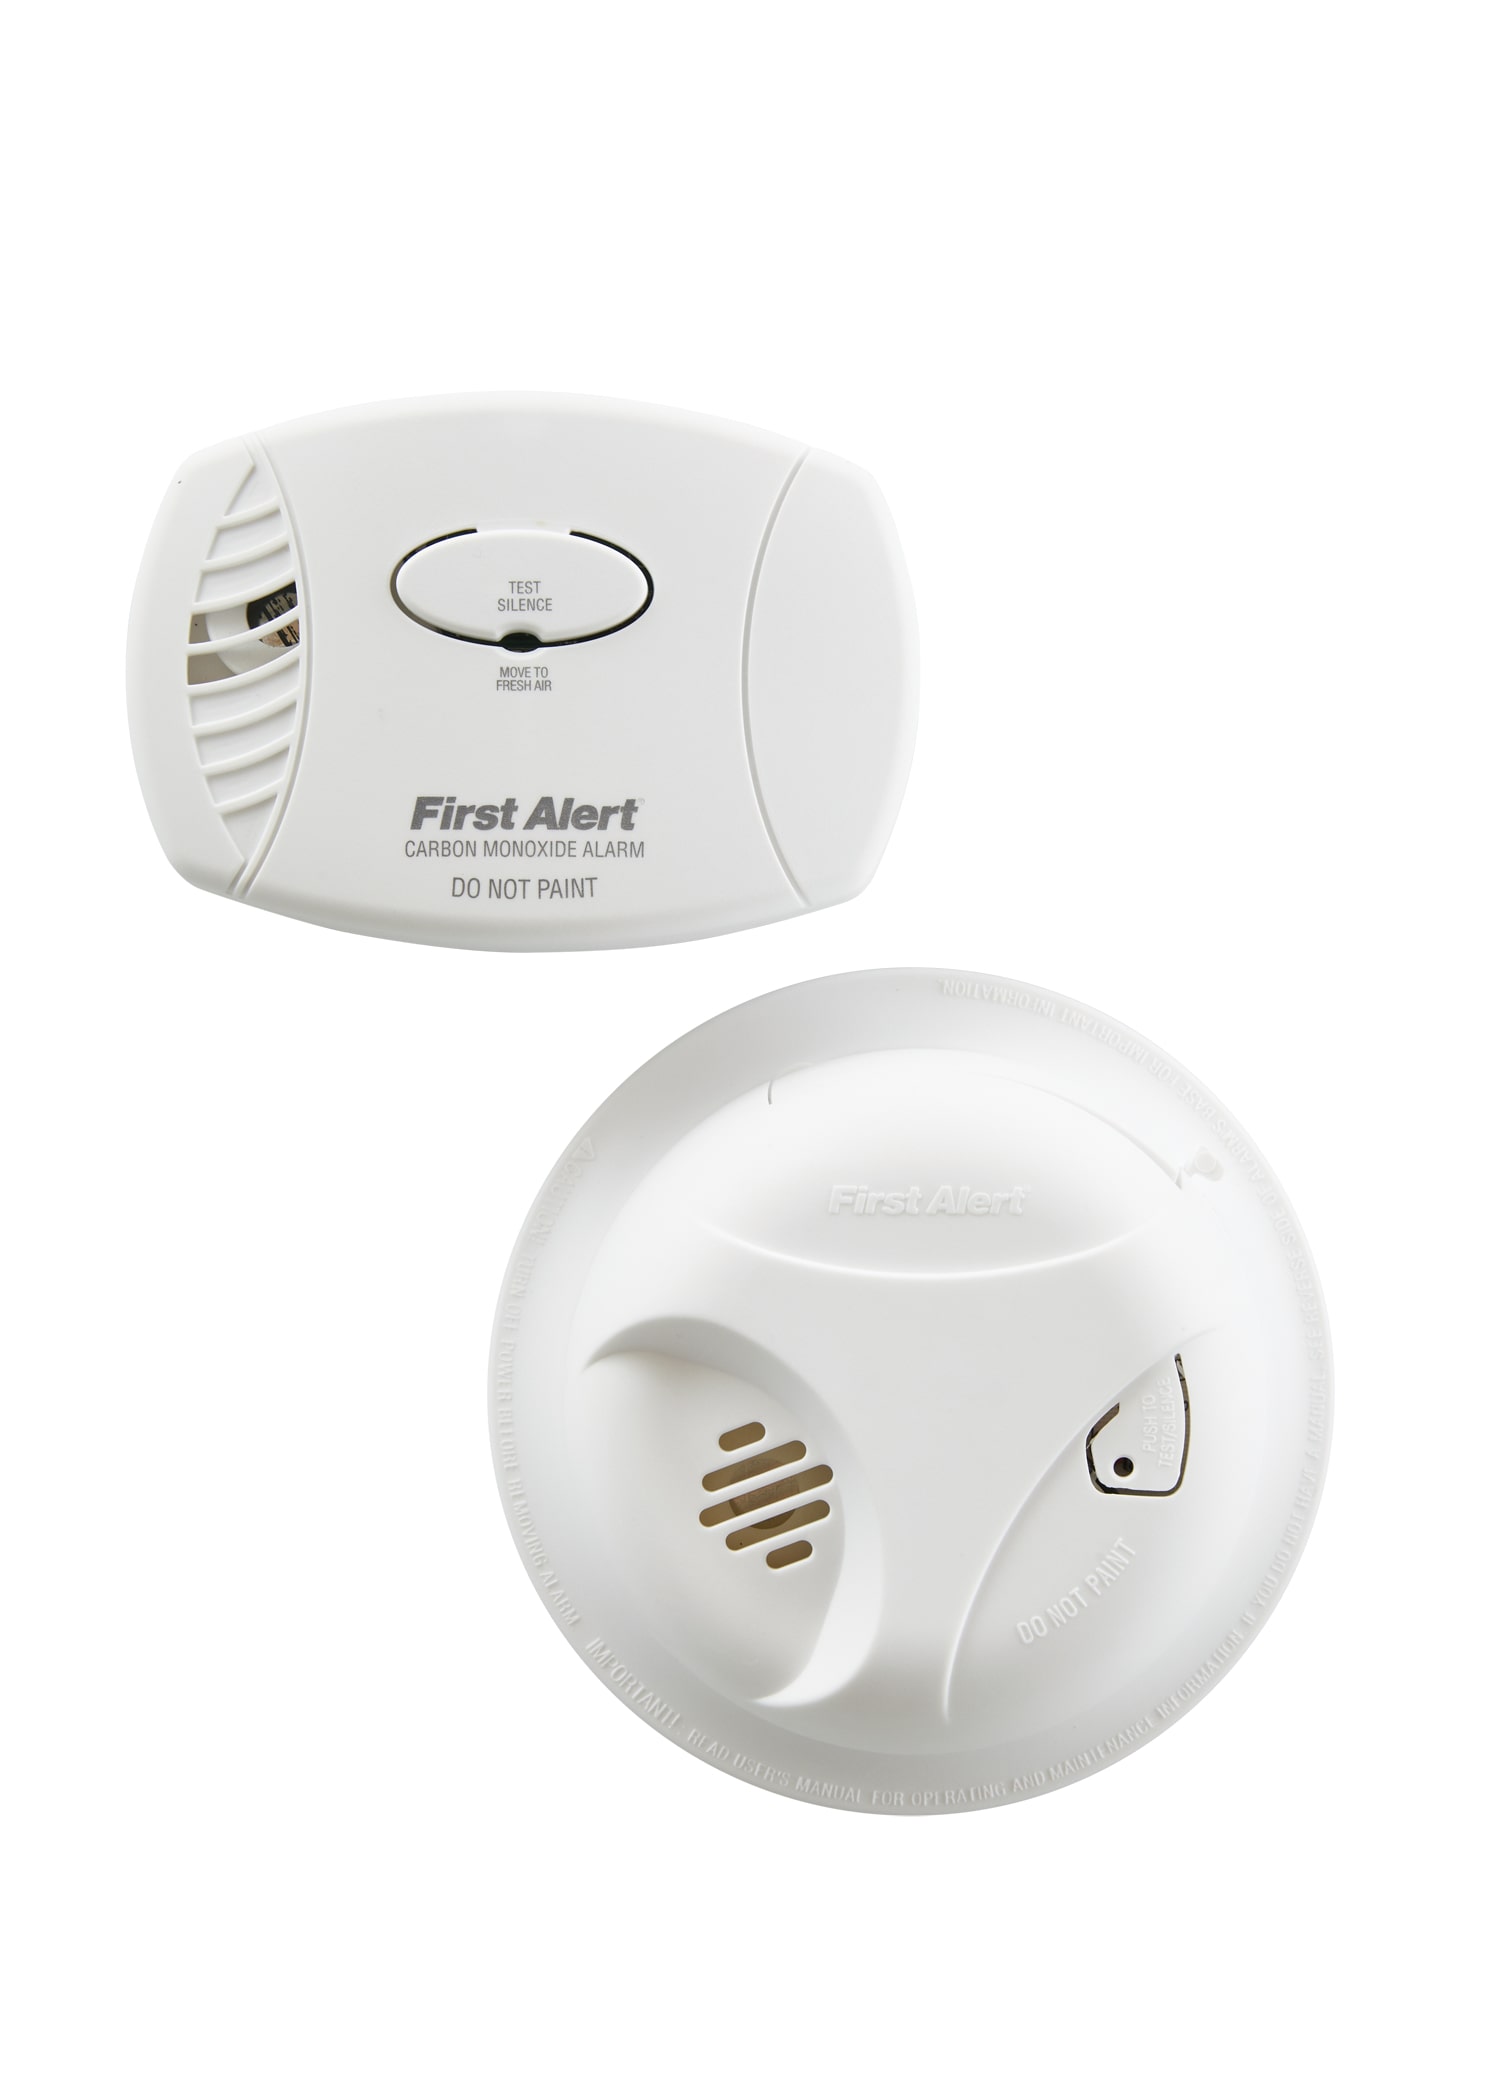 Smoke and CO Alarm, Battery Operated - image 1 of 5